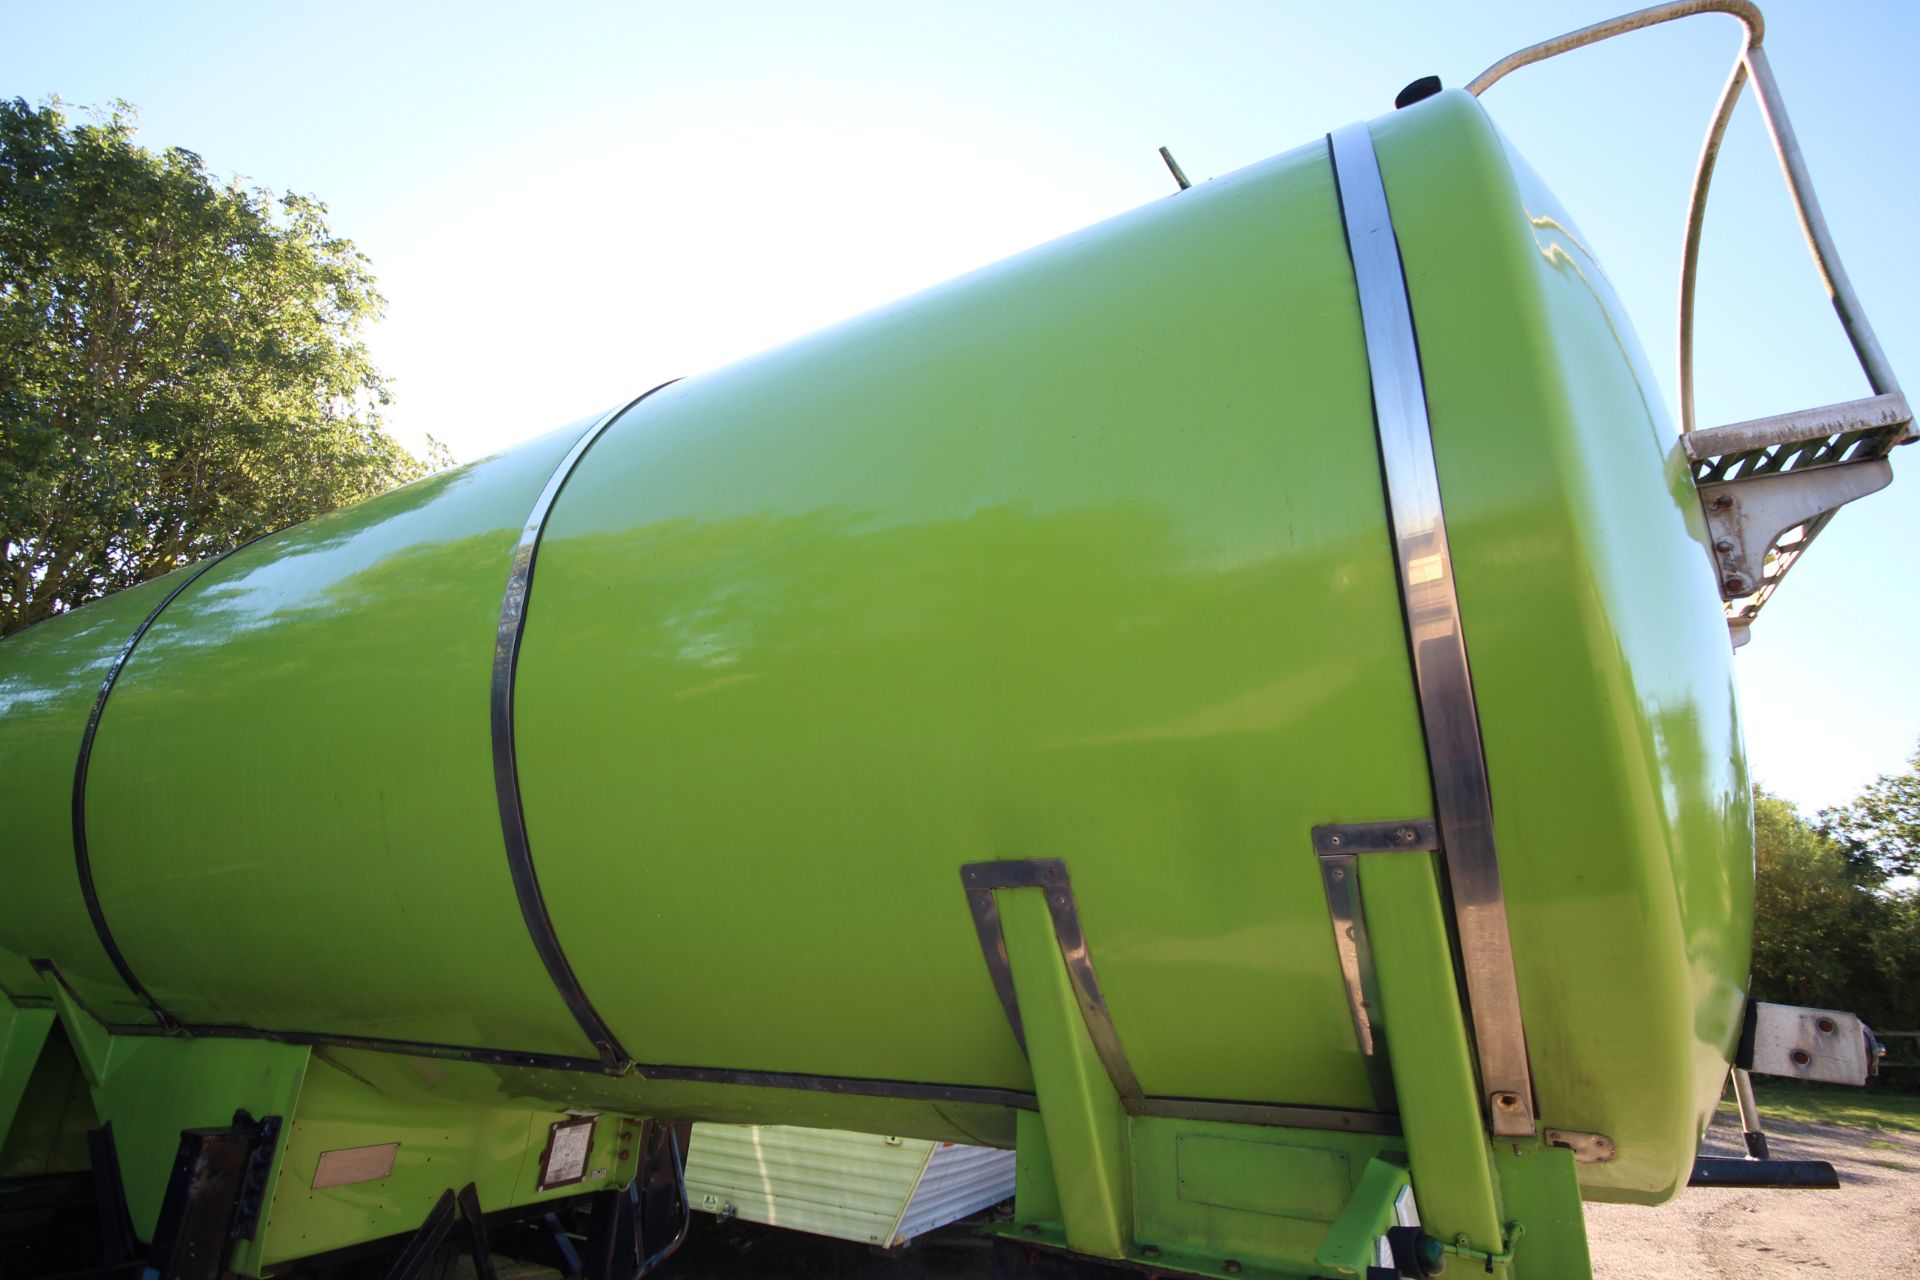 Dairy Products Transport 24,575L stainless steel tri-axle tanker. Registration A160342. Date of - Image 12 of 54